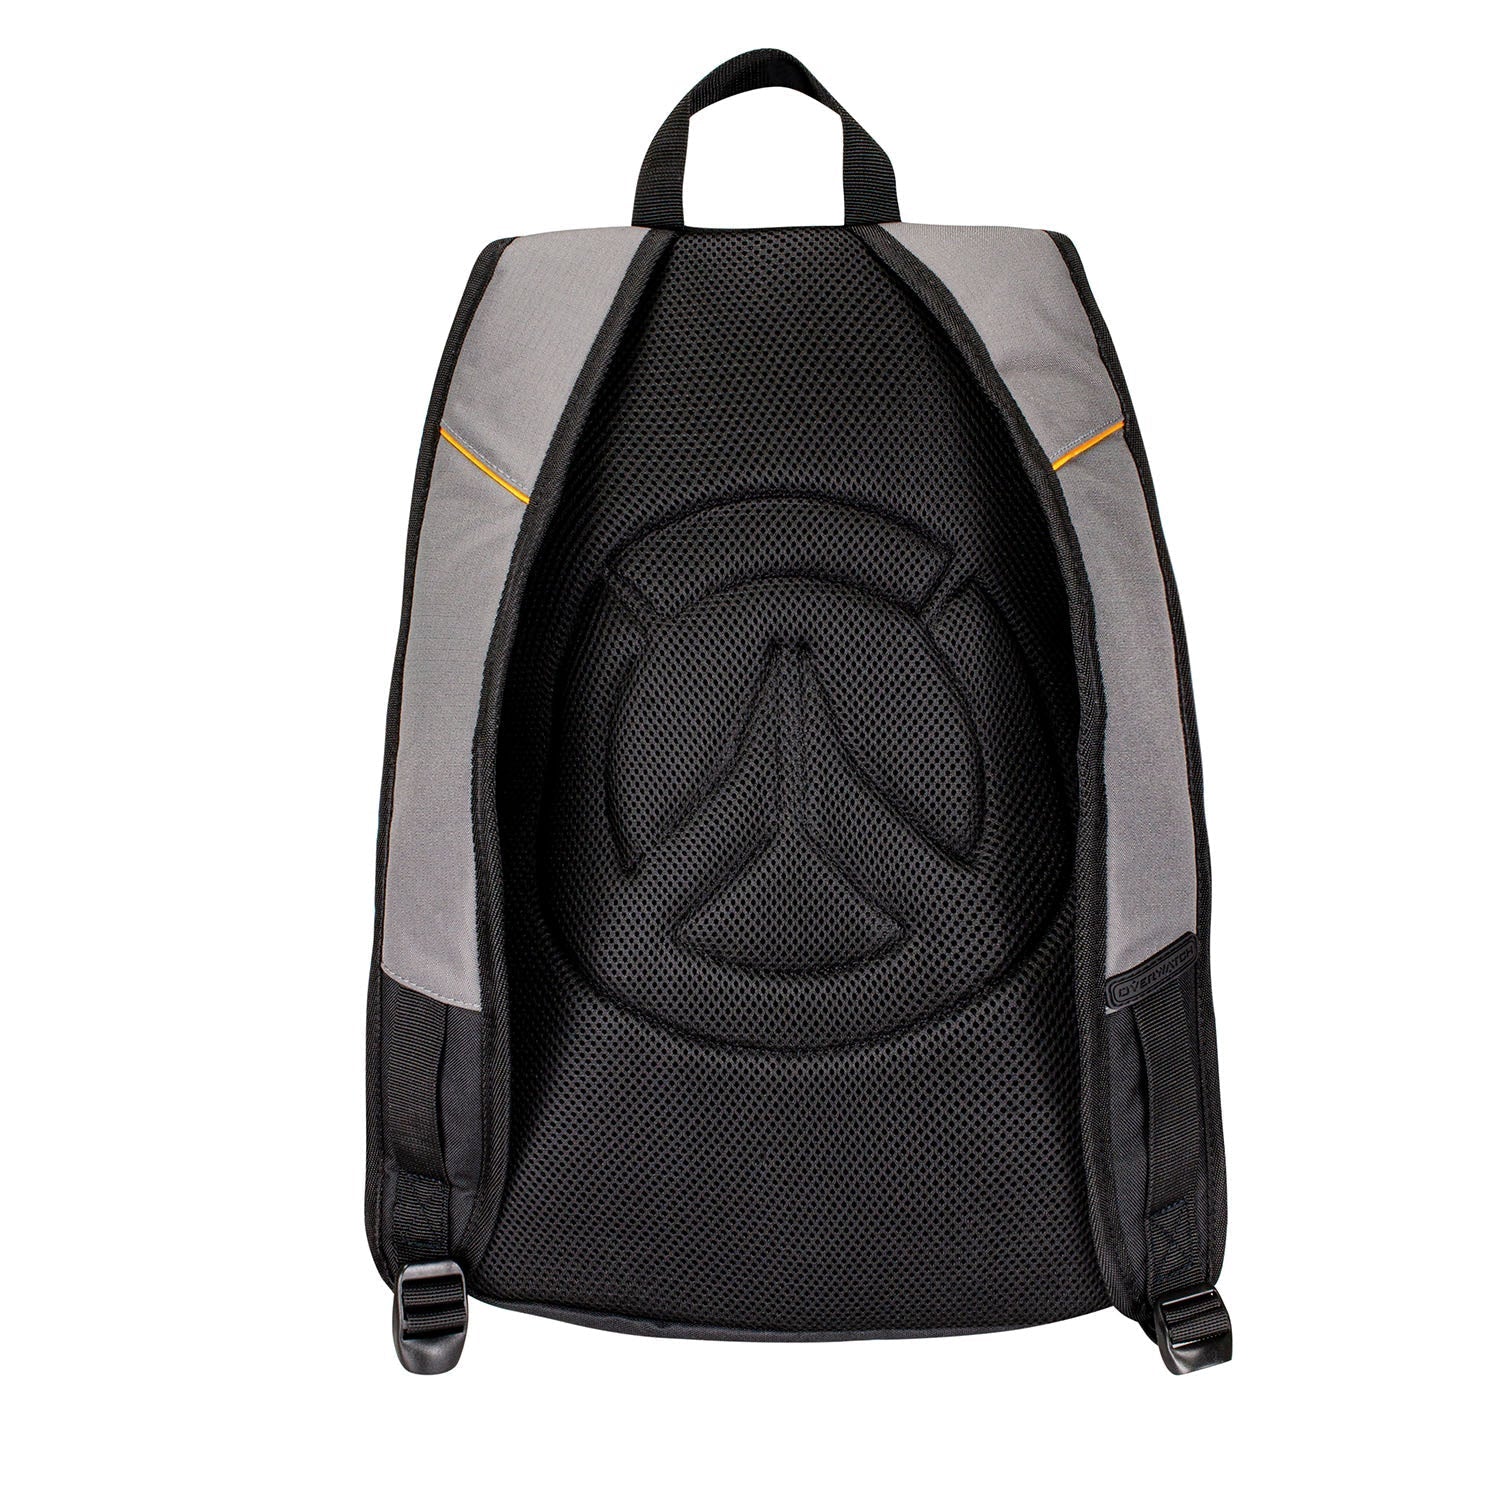 Back view of the Overwatch Gamer Backpack with padded straps and padded back.